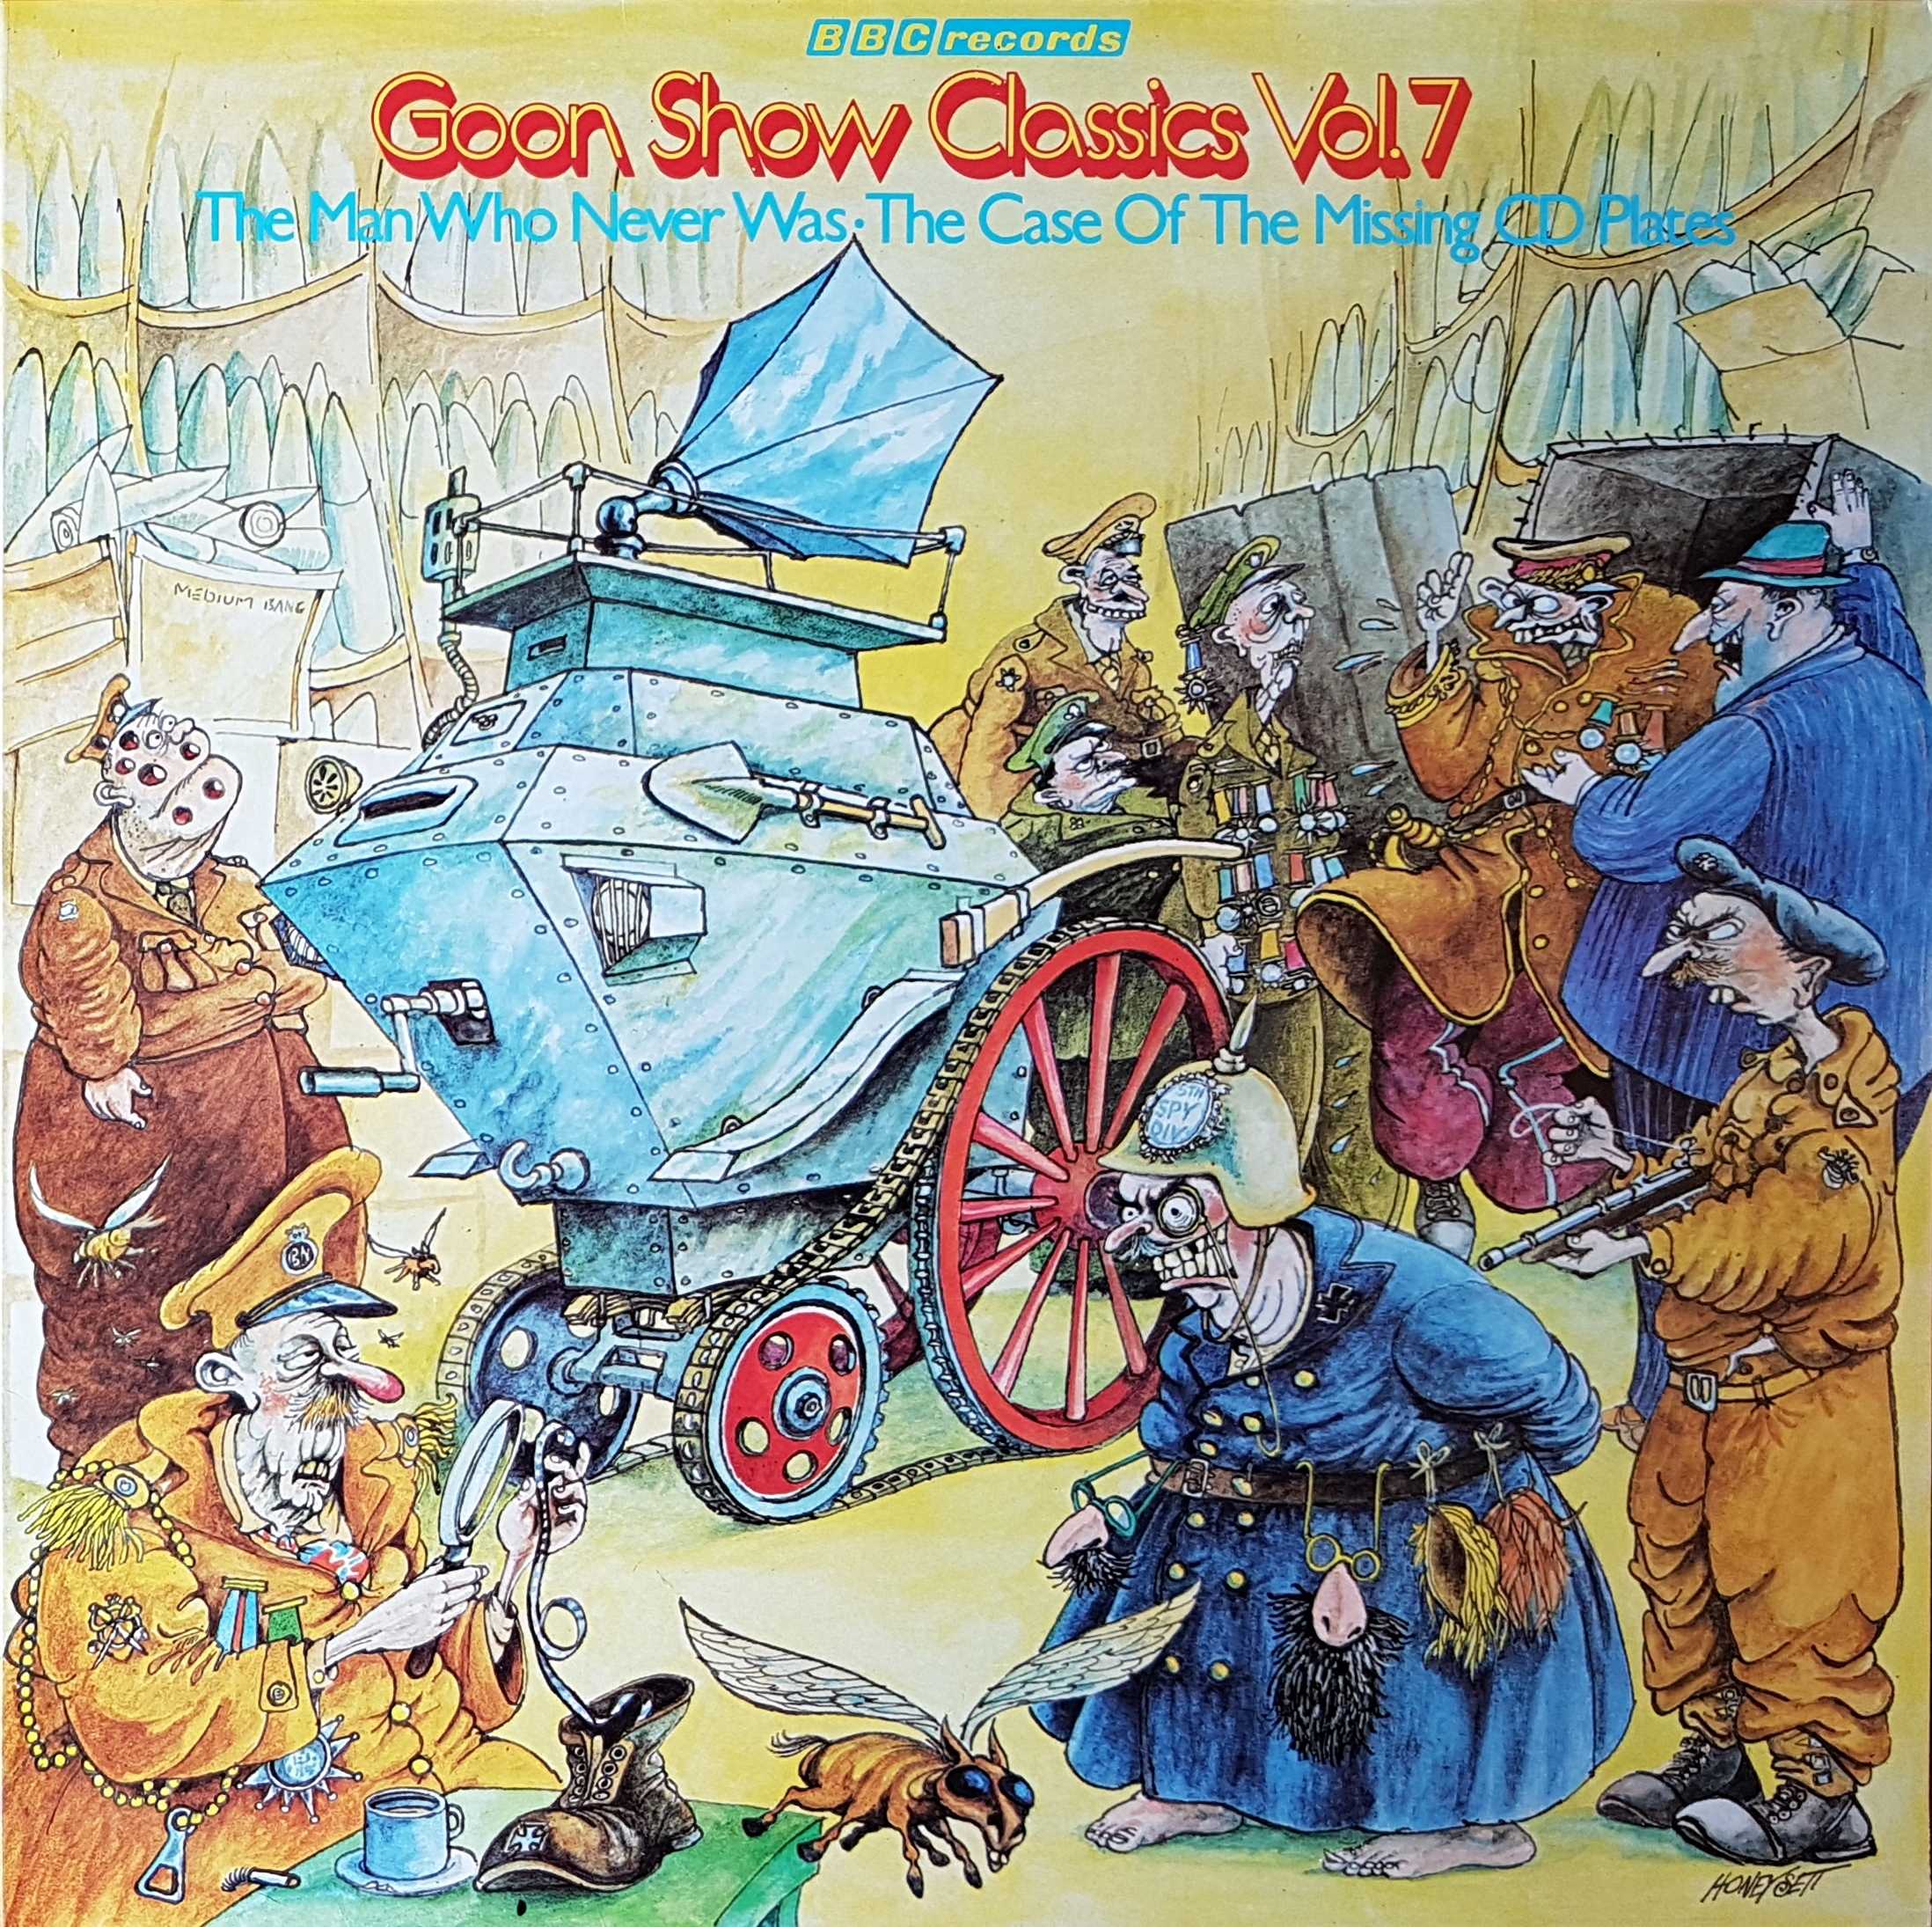 Picture of REB 392 Goon show classics - Volume 7 by artist Spike Milligan from the BBC records and Tapes library